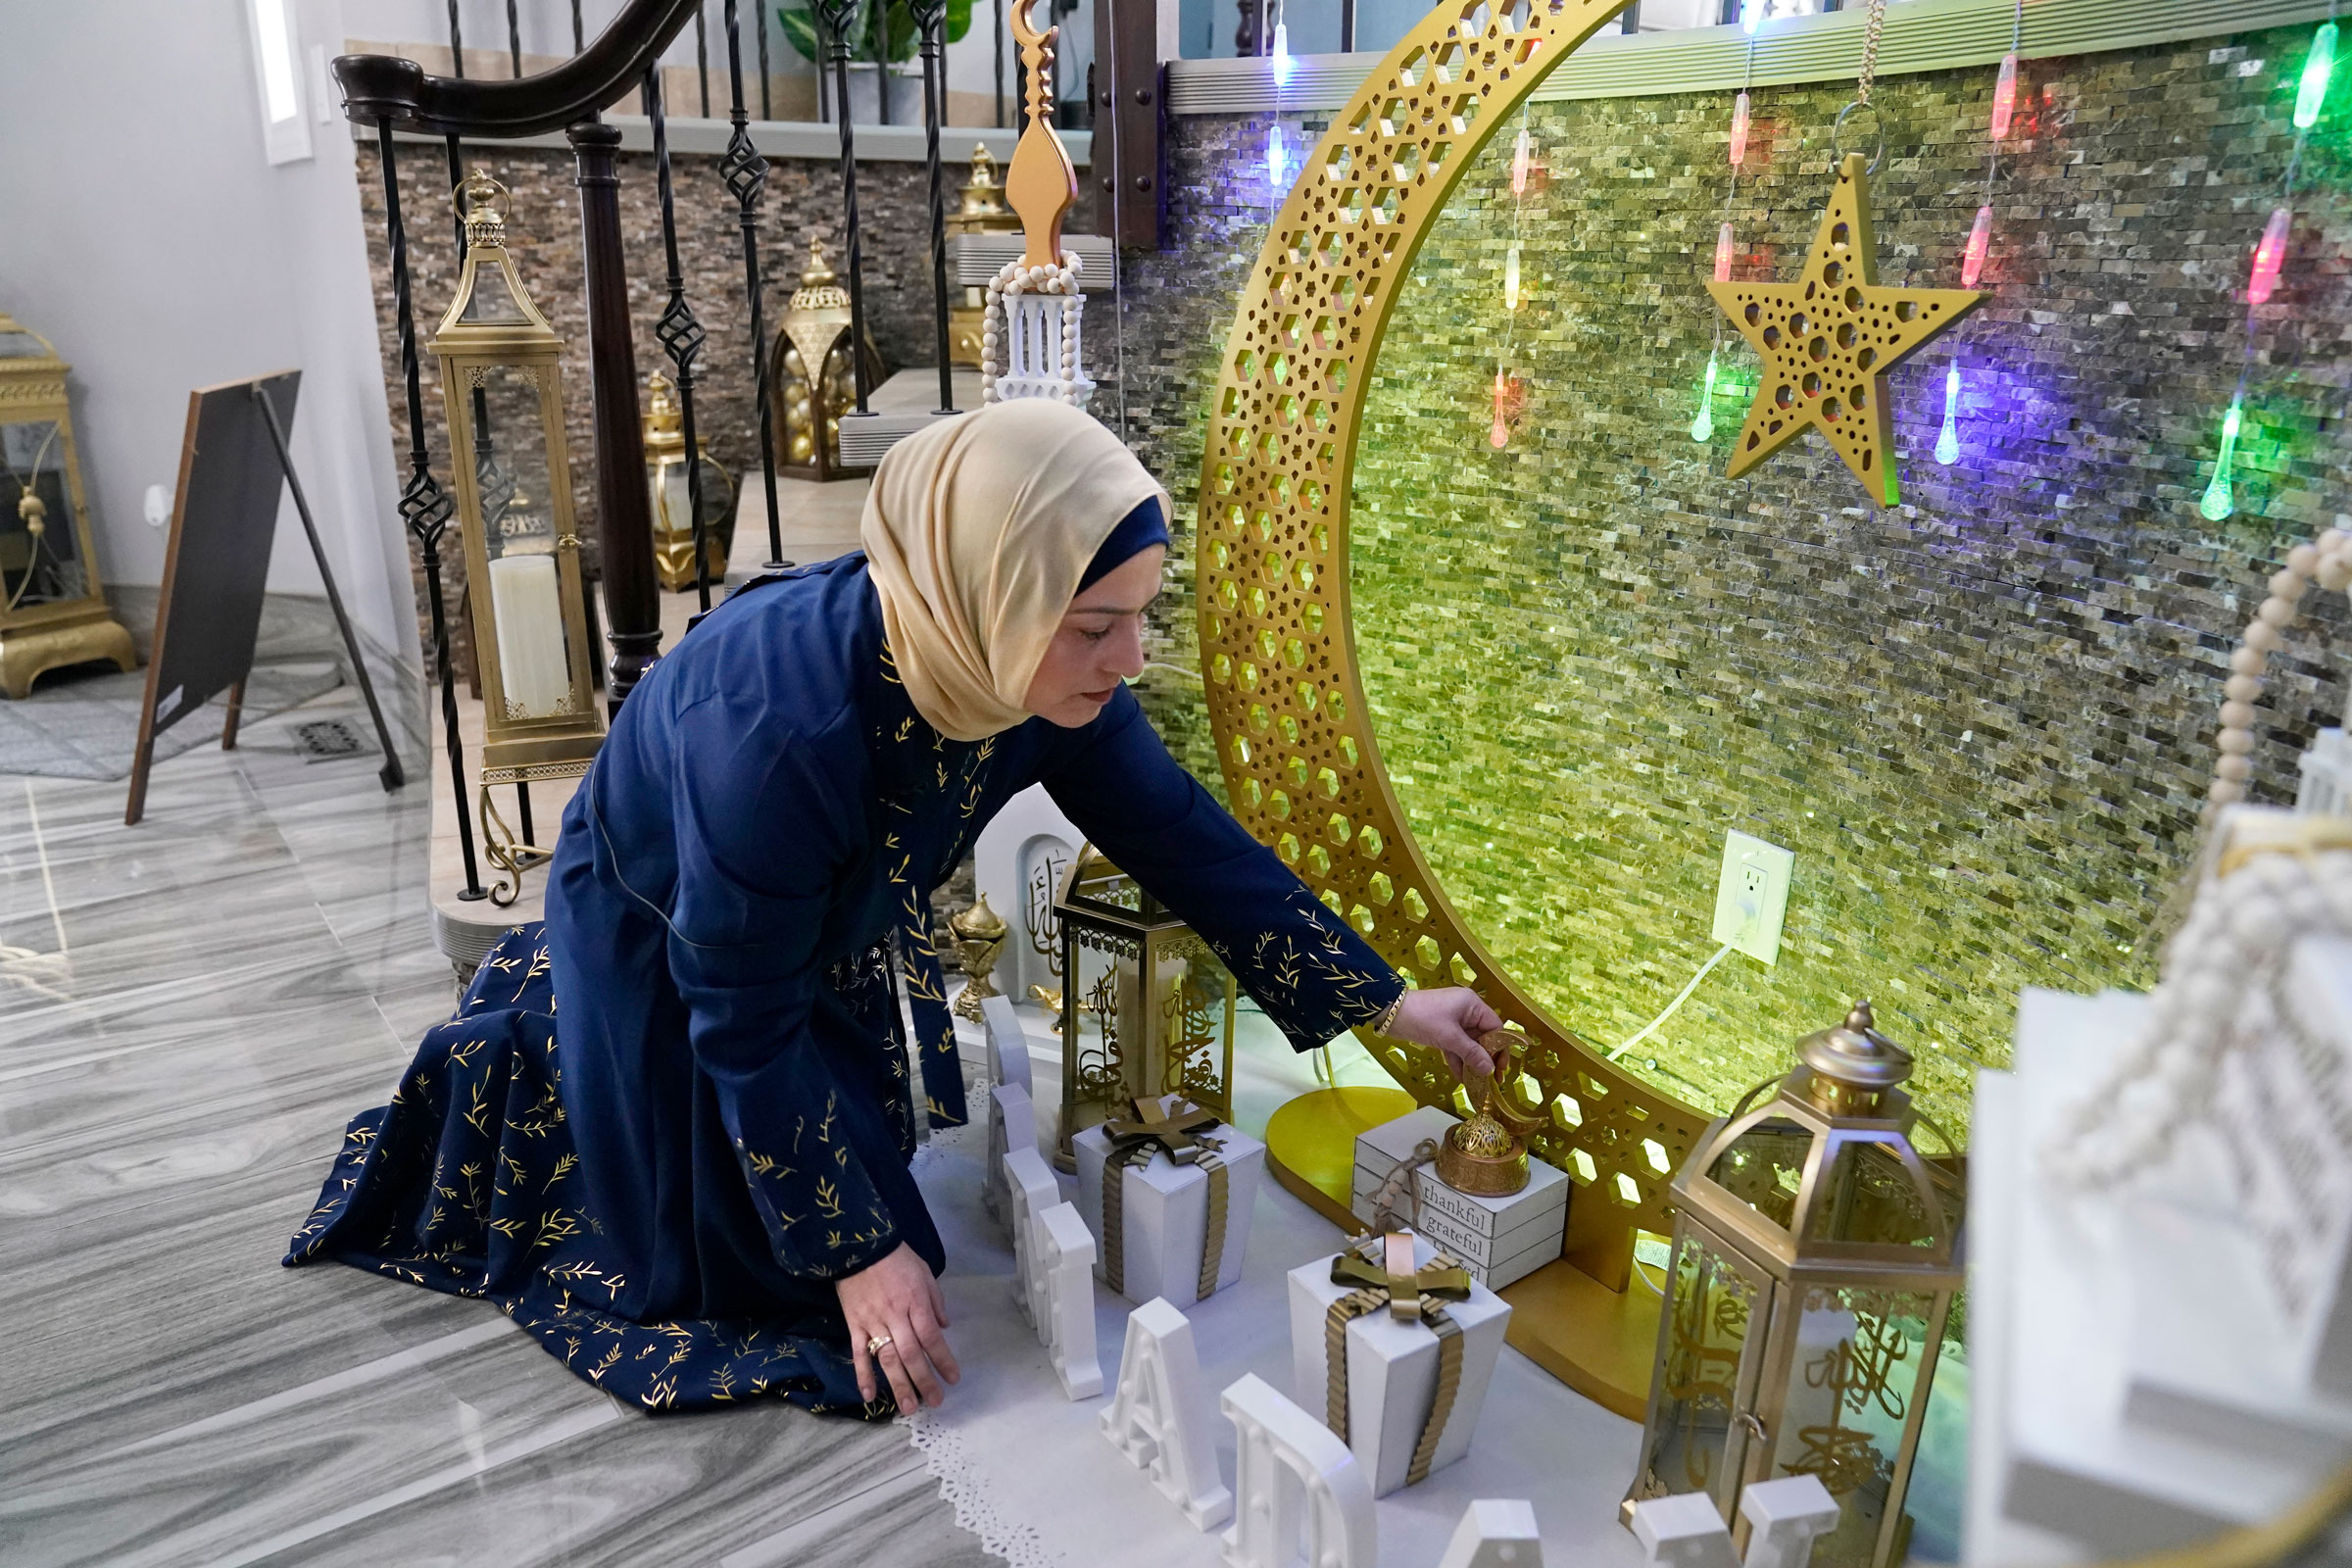 Suzanne Jaber of The Eid Shop looks at some of her company’s Ramadan decorations she created, in Dearborn Heights, Mich., on March 27, 2023. (Carlos Osorio—AP)